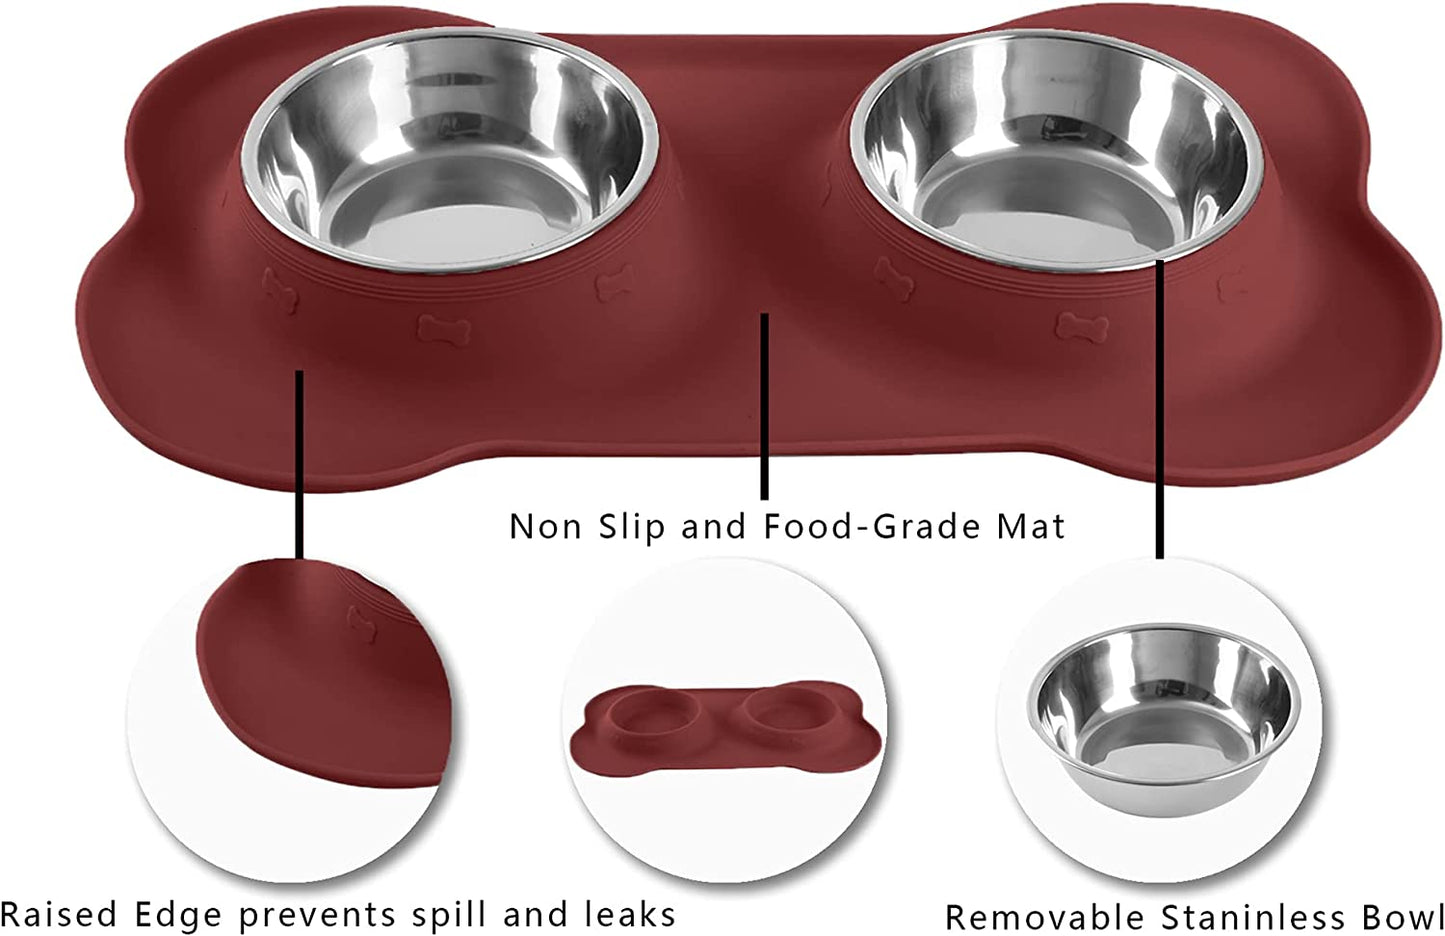 Hubulk Pet Dog Bowls 2 Stainless Steel Dog Bowl with No Spill Non-Skid Silicone Mat + Pet Food Scoop Water and Food Feeder Bowls for Feeding Small Medium Large Dogs Cats Puppies (S, Burgundy)